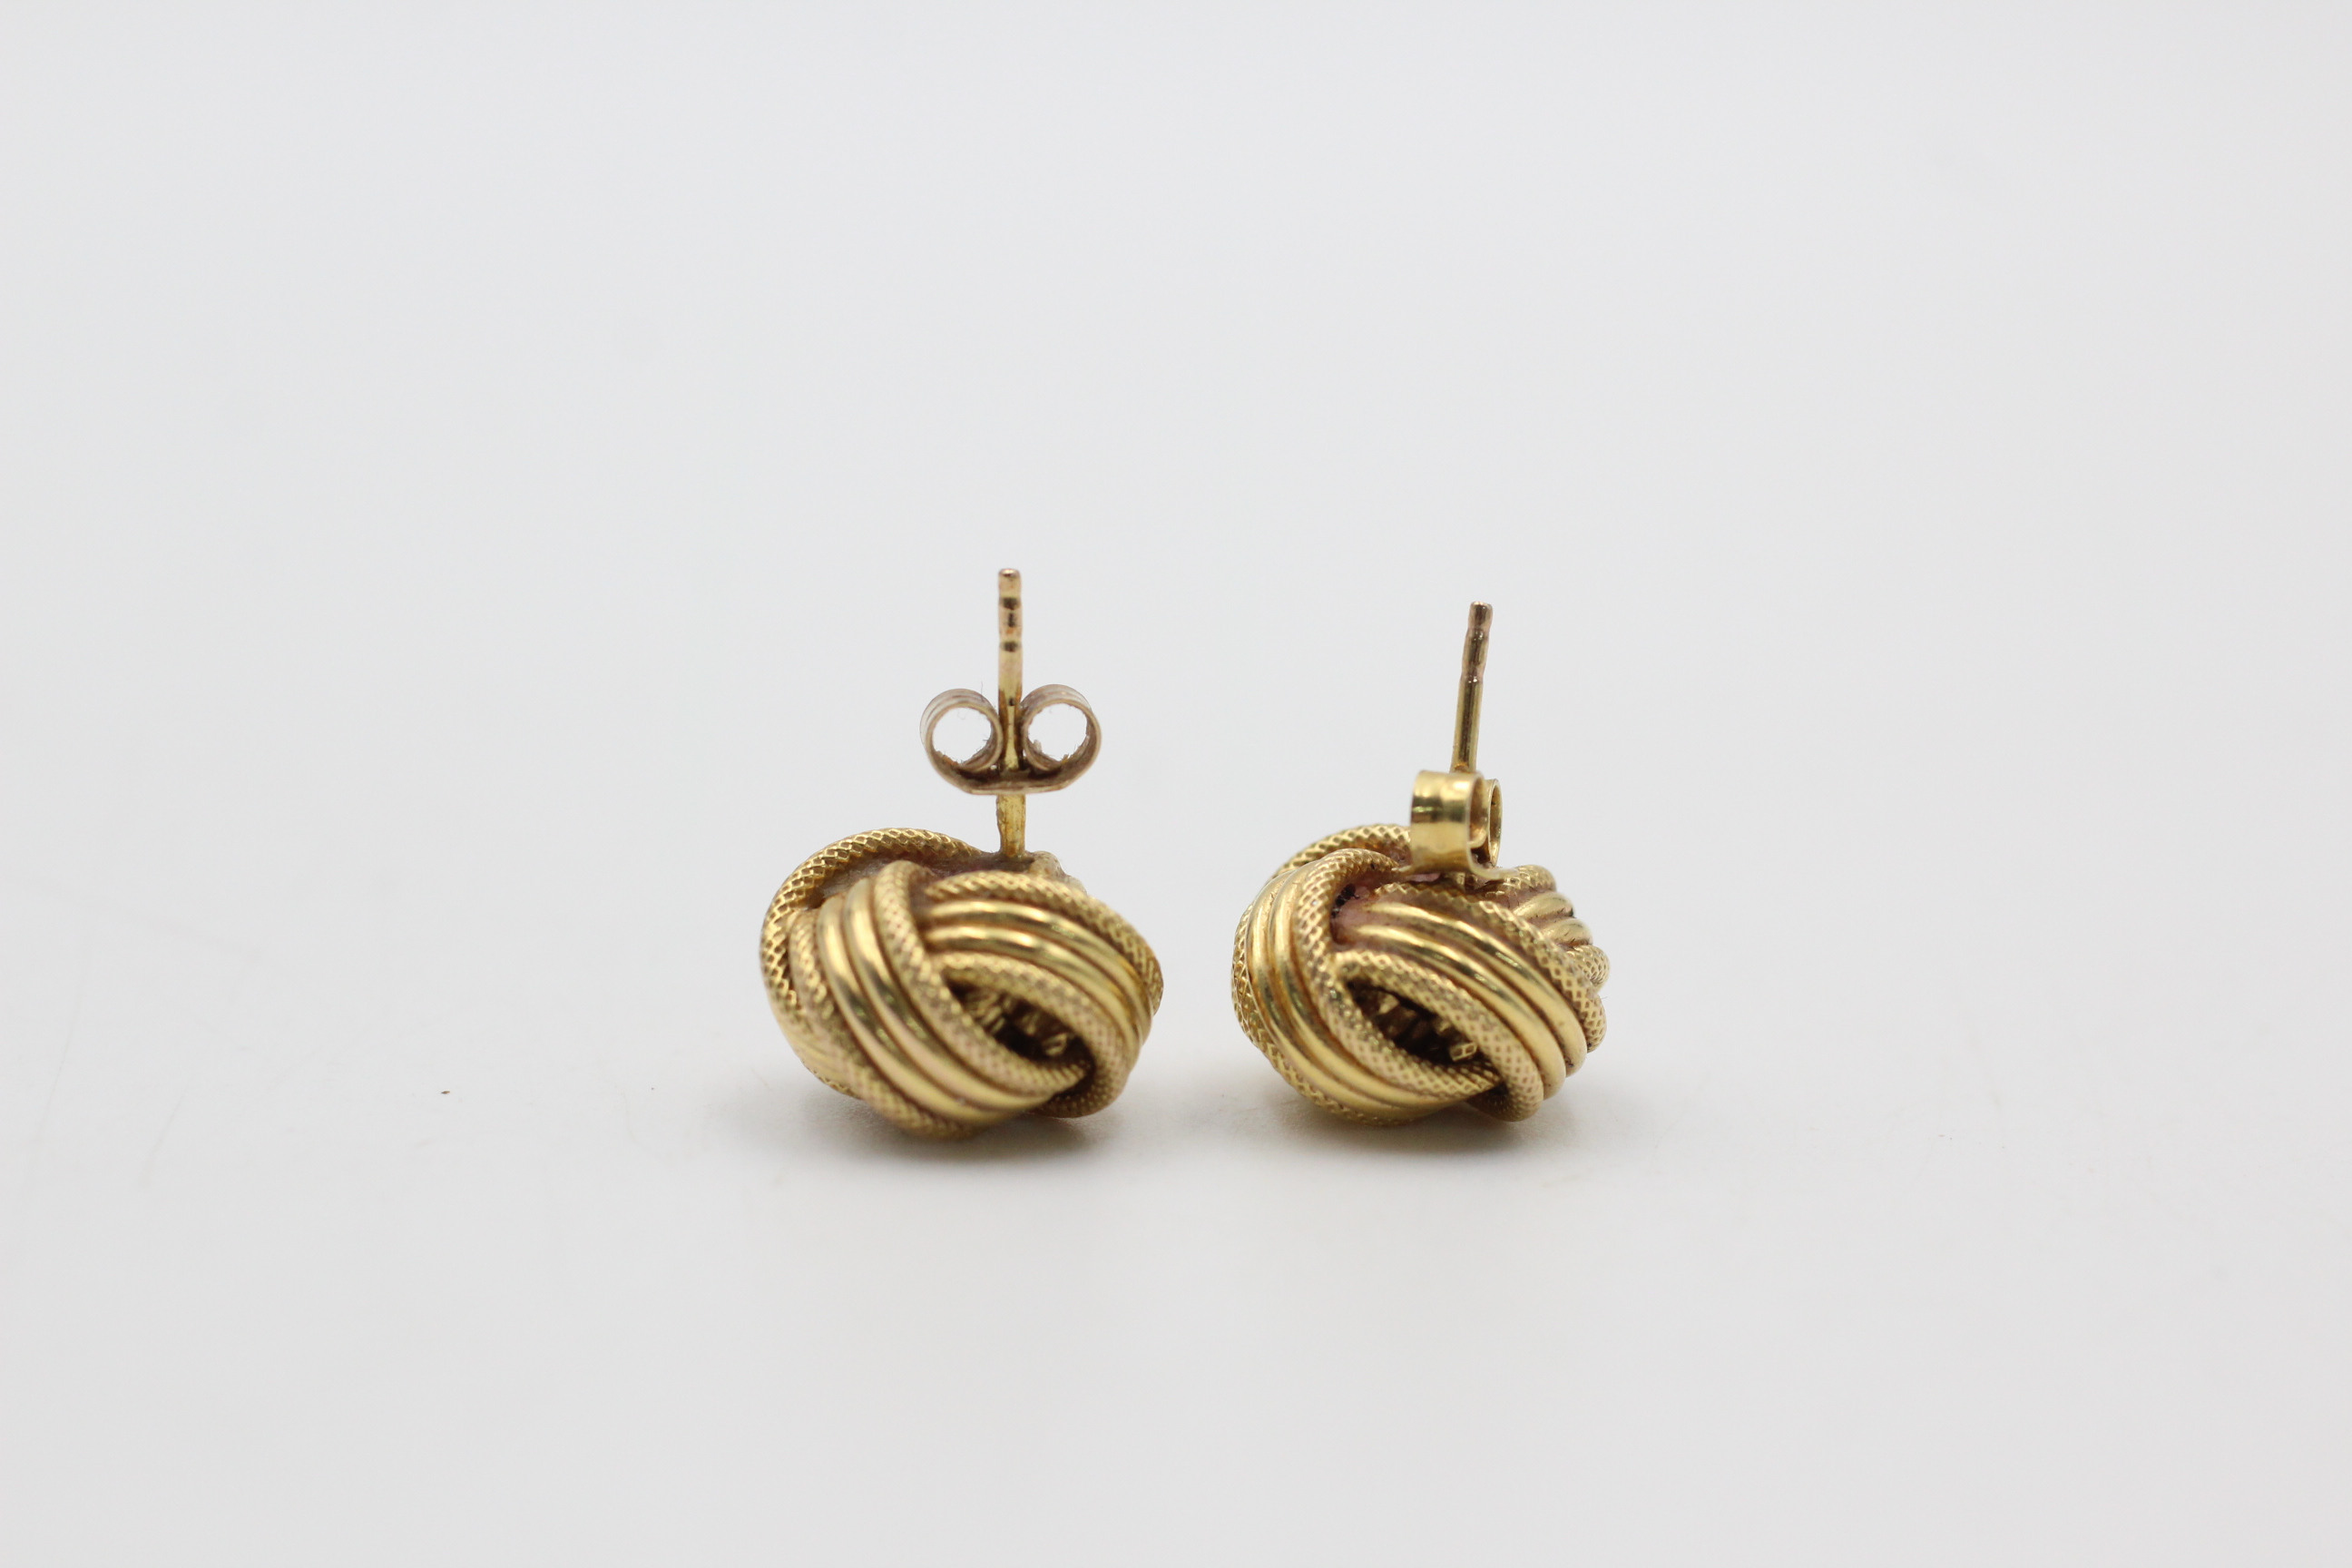 9ct gold textured knot stud earrings (3.3g) - Image 4 of 4